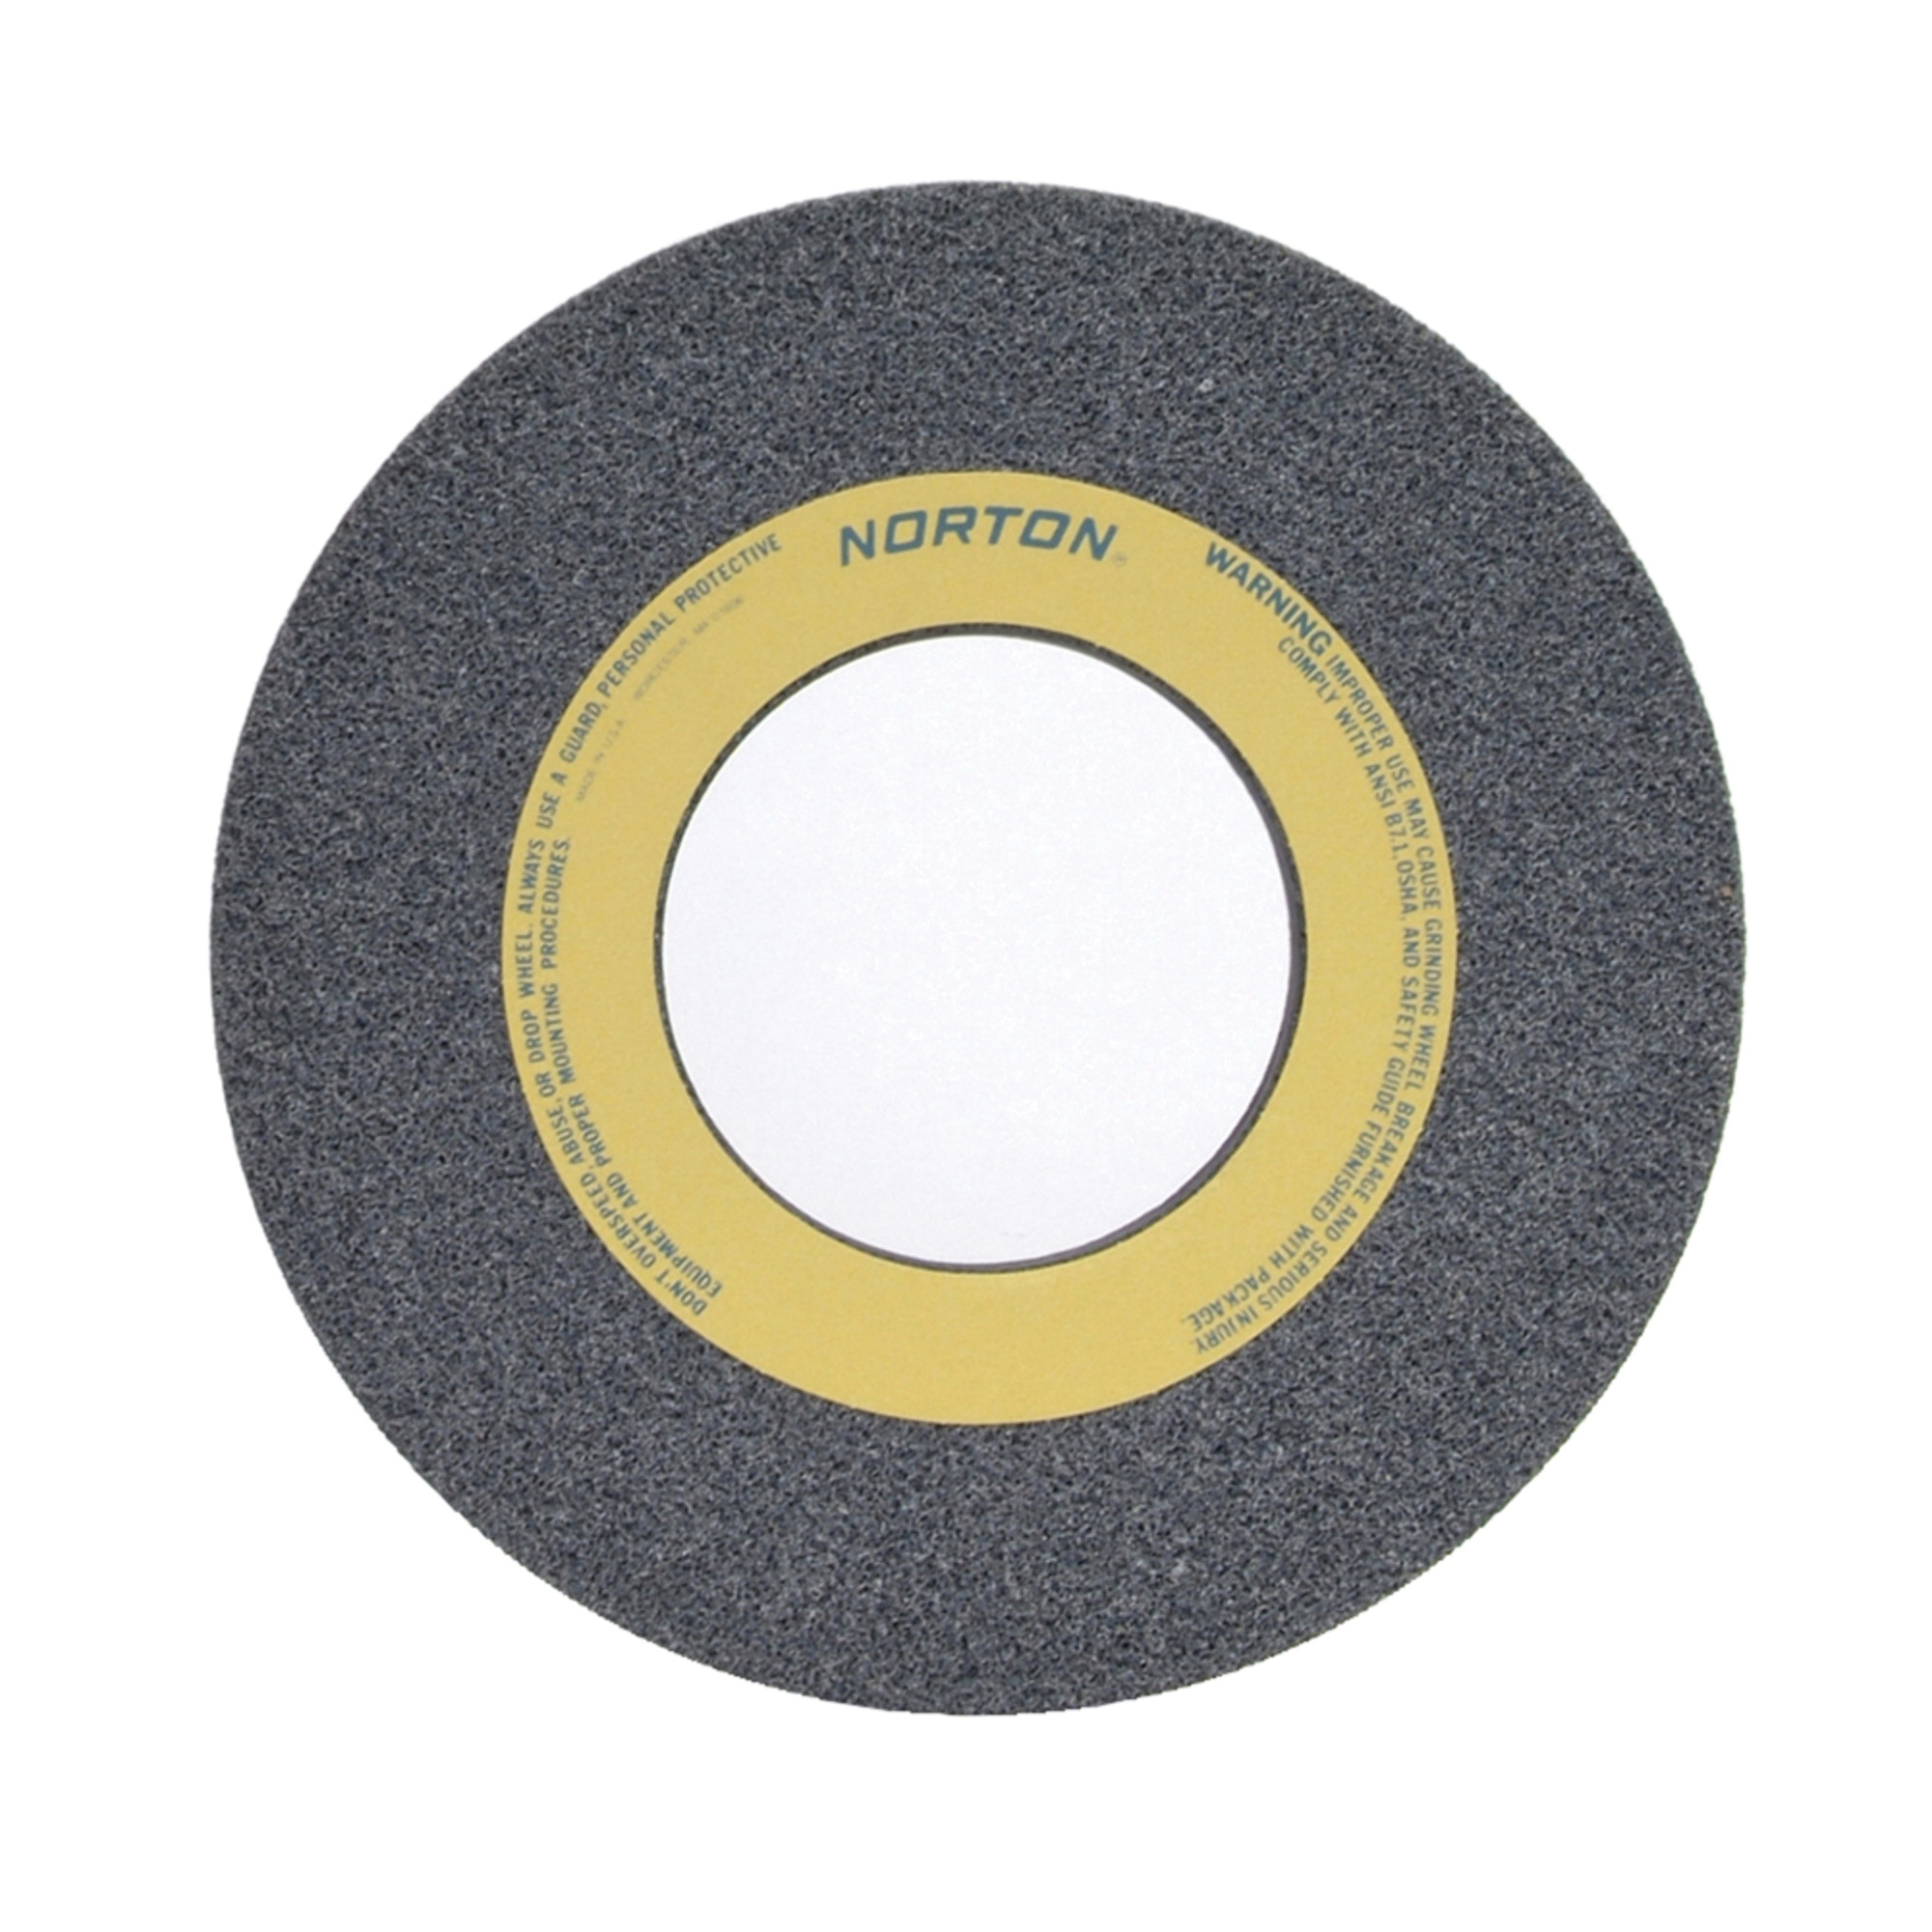 Norton® 66253262686 32A Straight Toolroom Wheel, 12 in Dia x 1 in THK, 5 in Center Hole, 60 Grit, Aluminum Oxide Abrasive